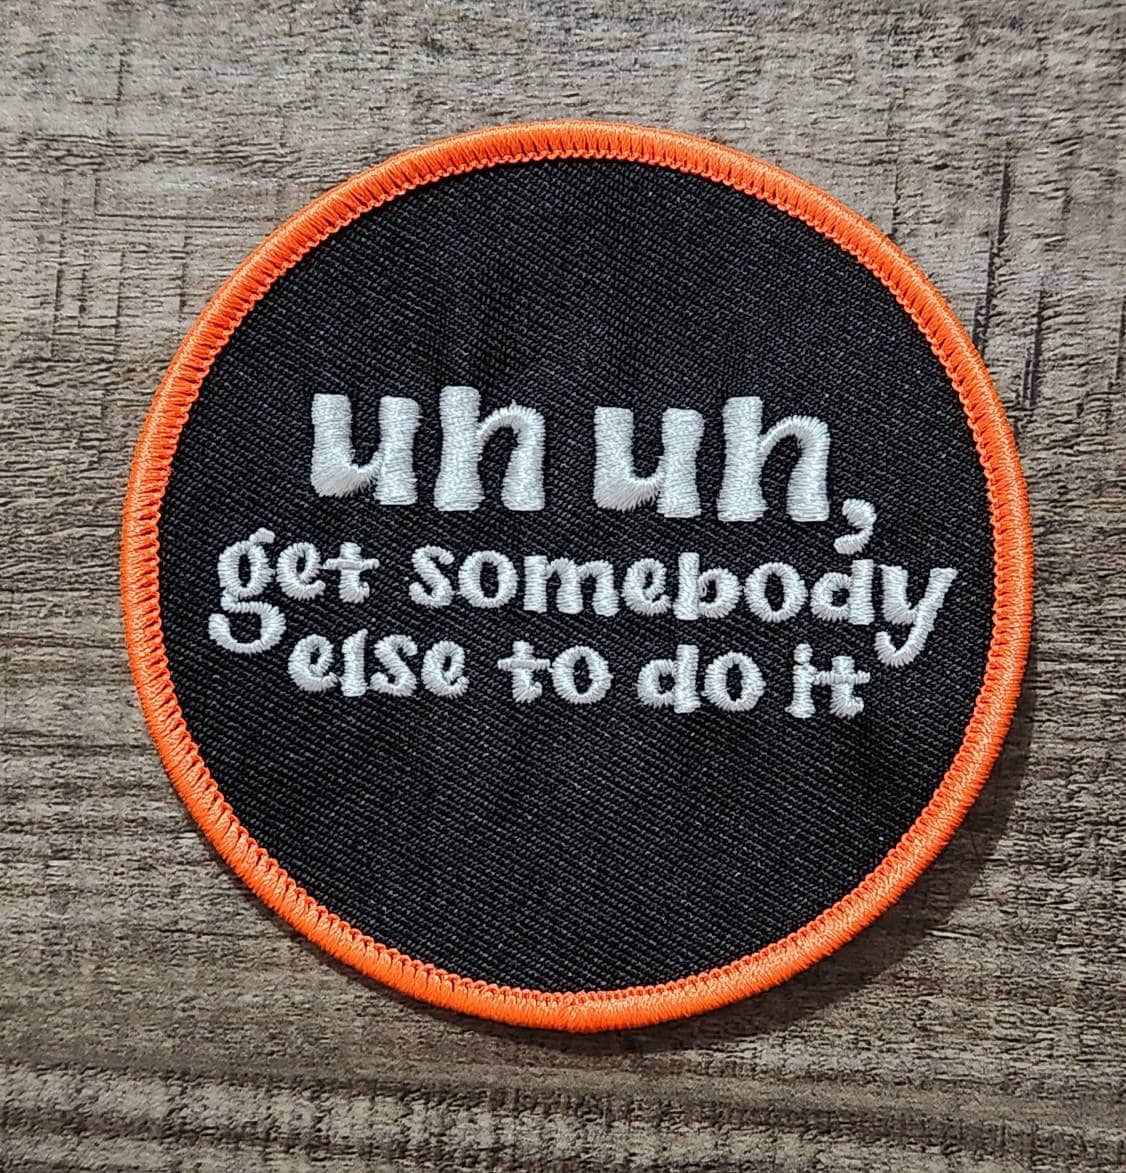 Funny Patch, 1-pc "Un, Un, Get Somebody Else To Do It" Statement Patch, Size 3" Circular, Applique for Clothing, Hats, Shoes